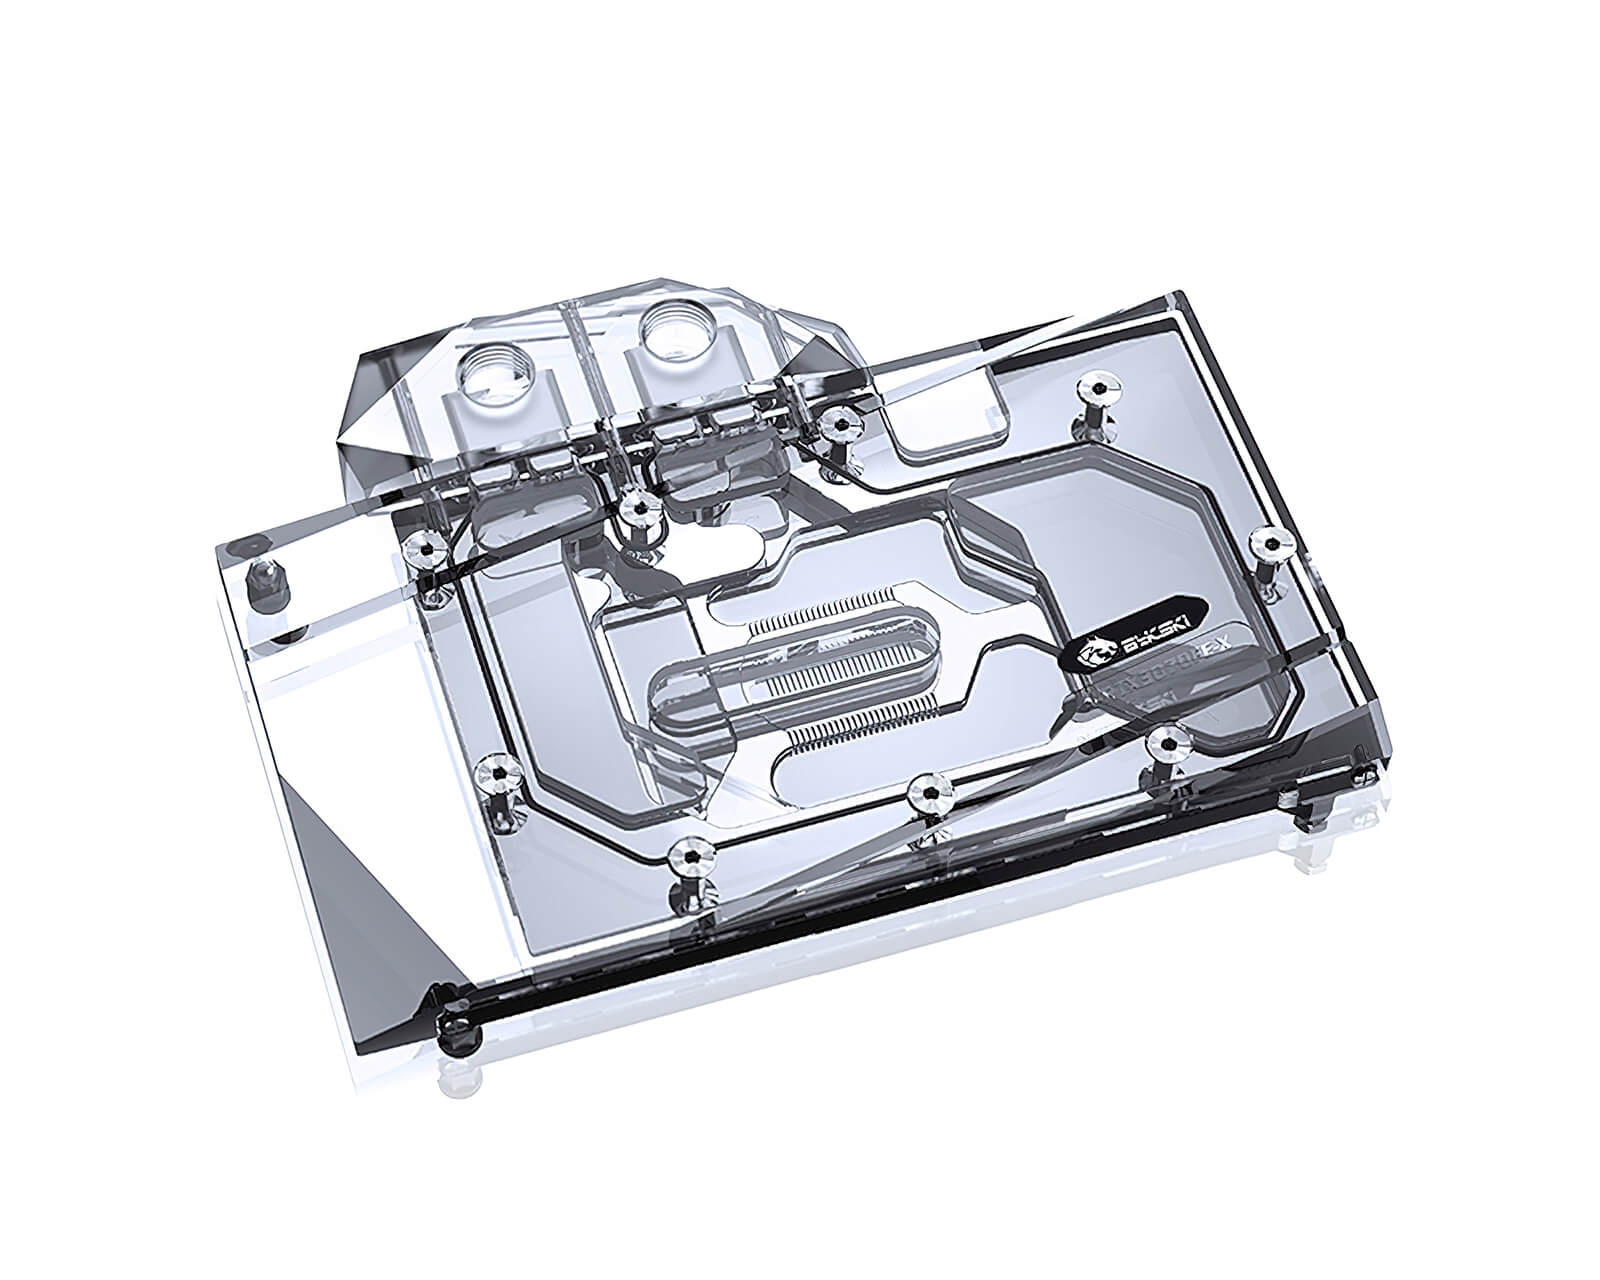 Bykski Full Coverage GPU Water Block and Backplate for RTX 3060Ti/3070 Founders Edition (N-RTX3070FE-X) - PrimoChill - KEEPING IT COOL